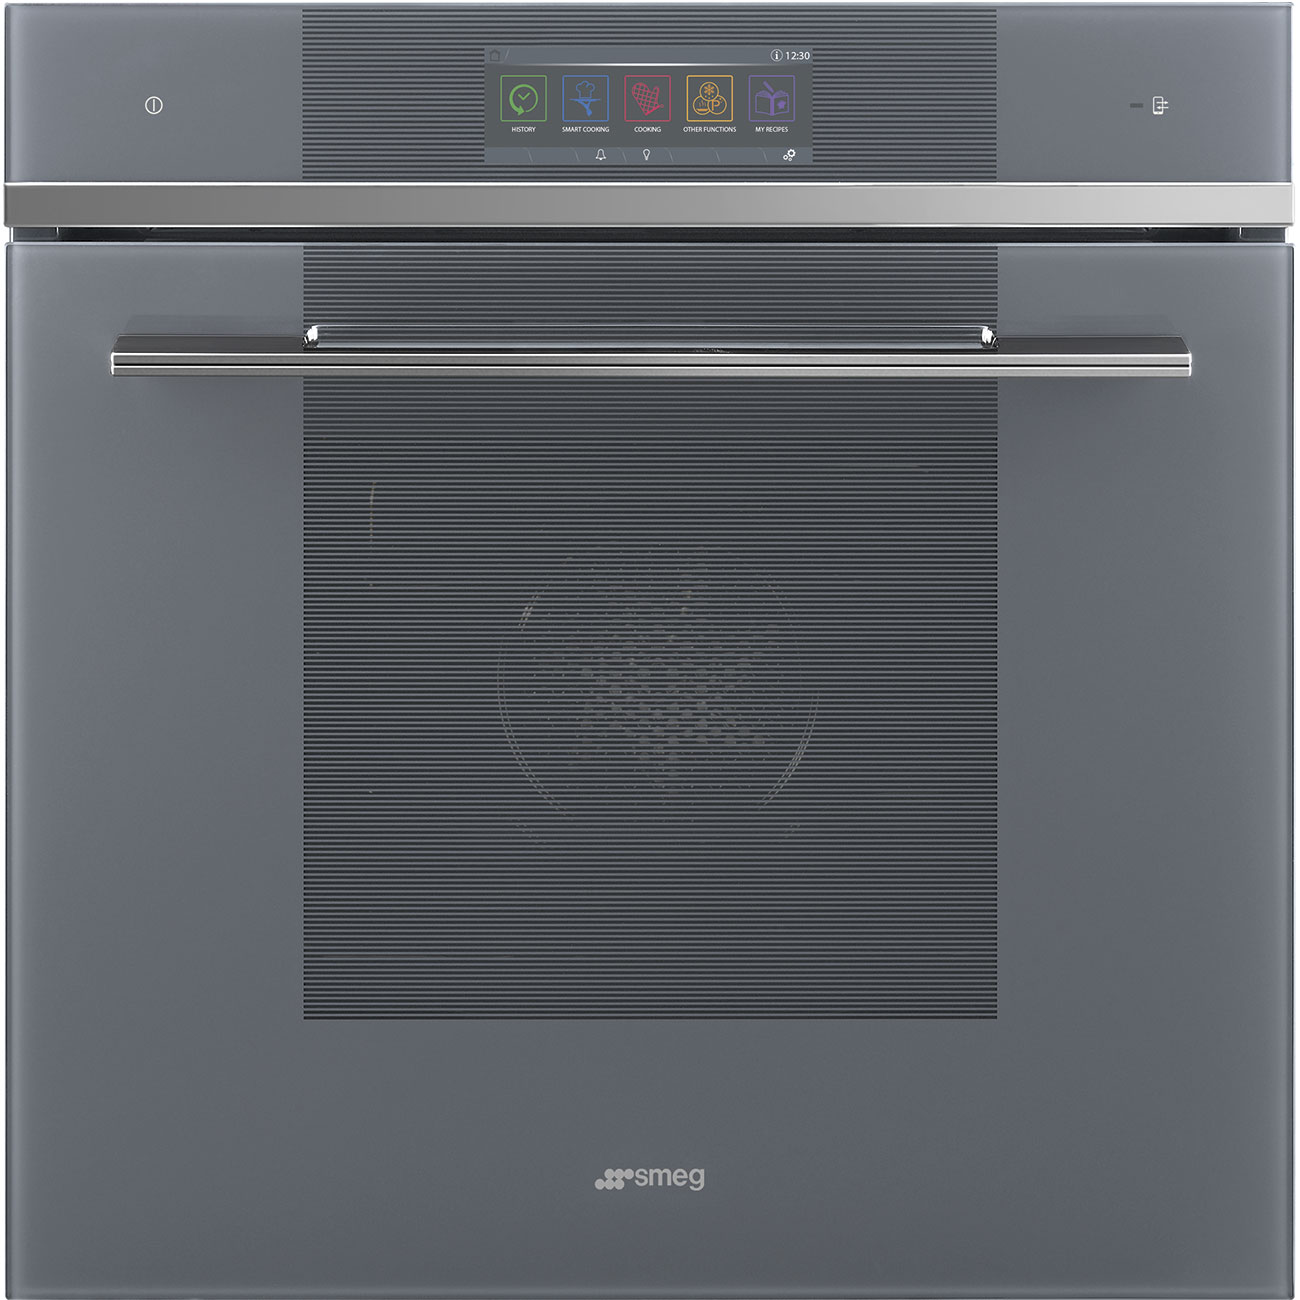 Thermo-ventilated Oven 60cm Smeg_1